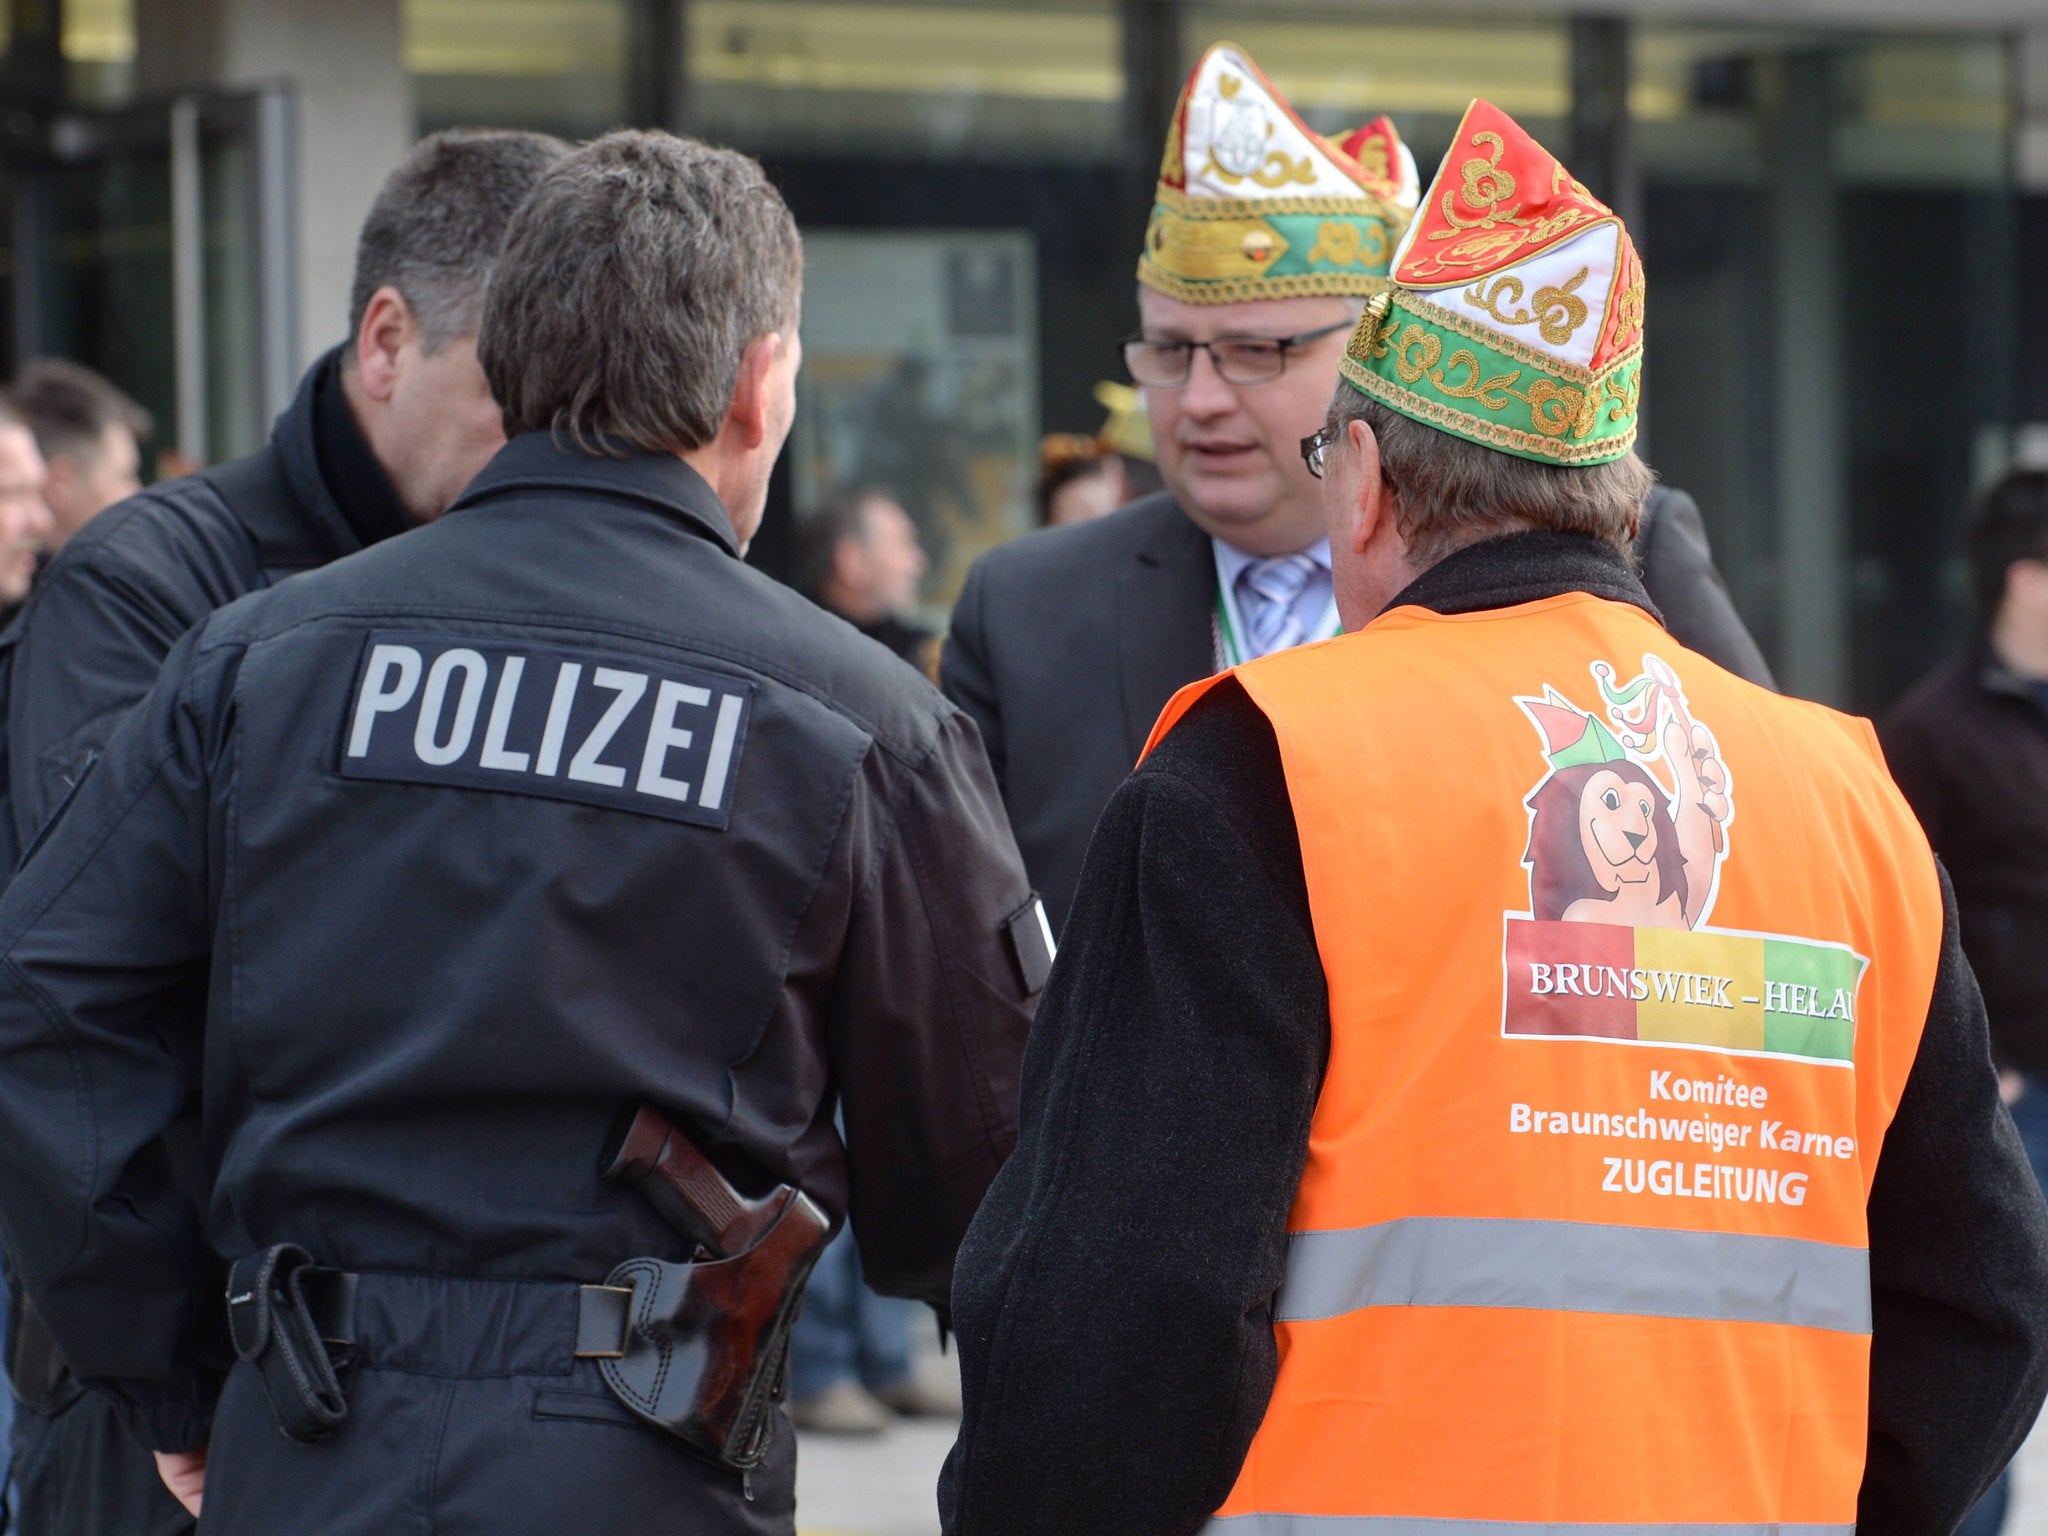 Carnival parade organizers and police discuss in Braunschweig, Germany, Sunday, Feb. 15, 2015. Police in Braunschweig cancelled a popular carnival street parade because of fears of an imminent Islamist terror attack.